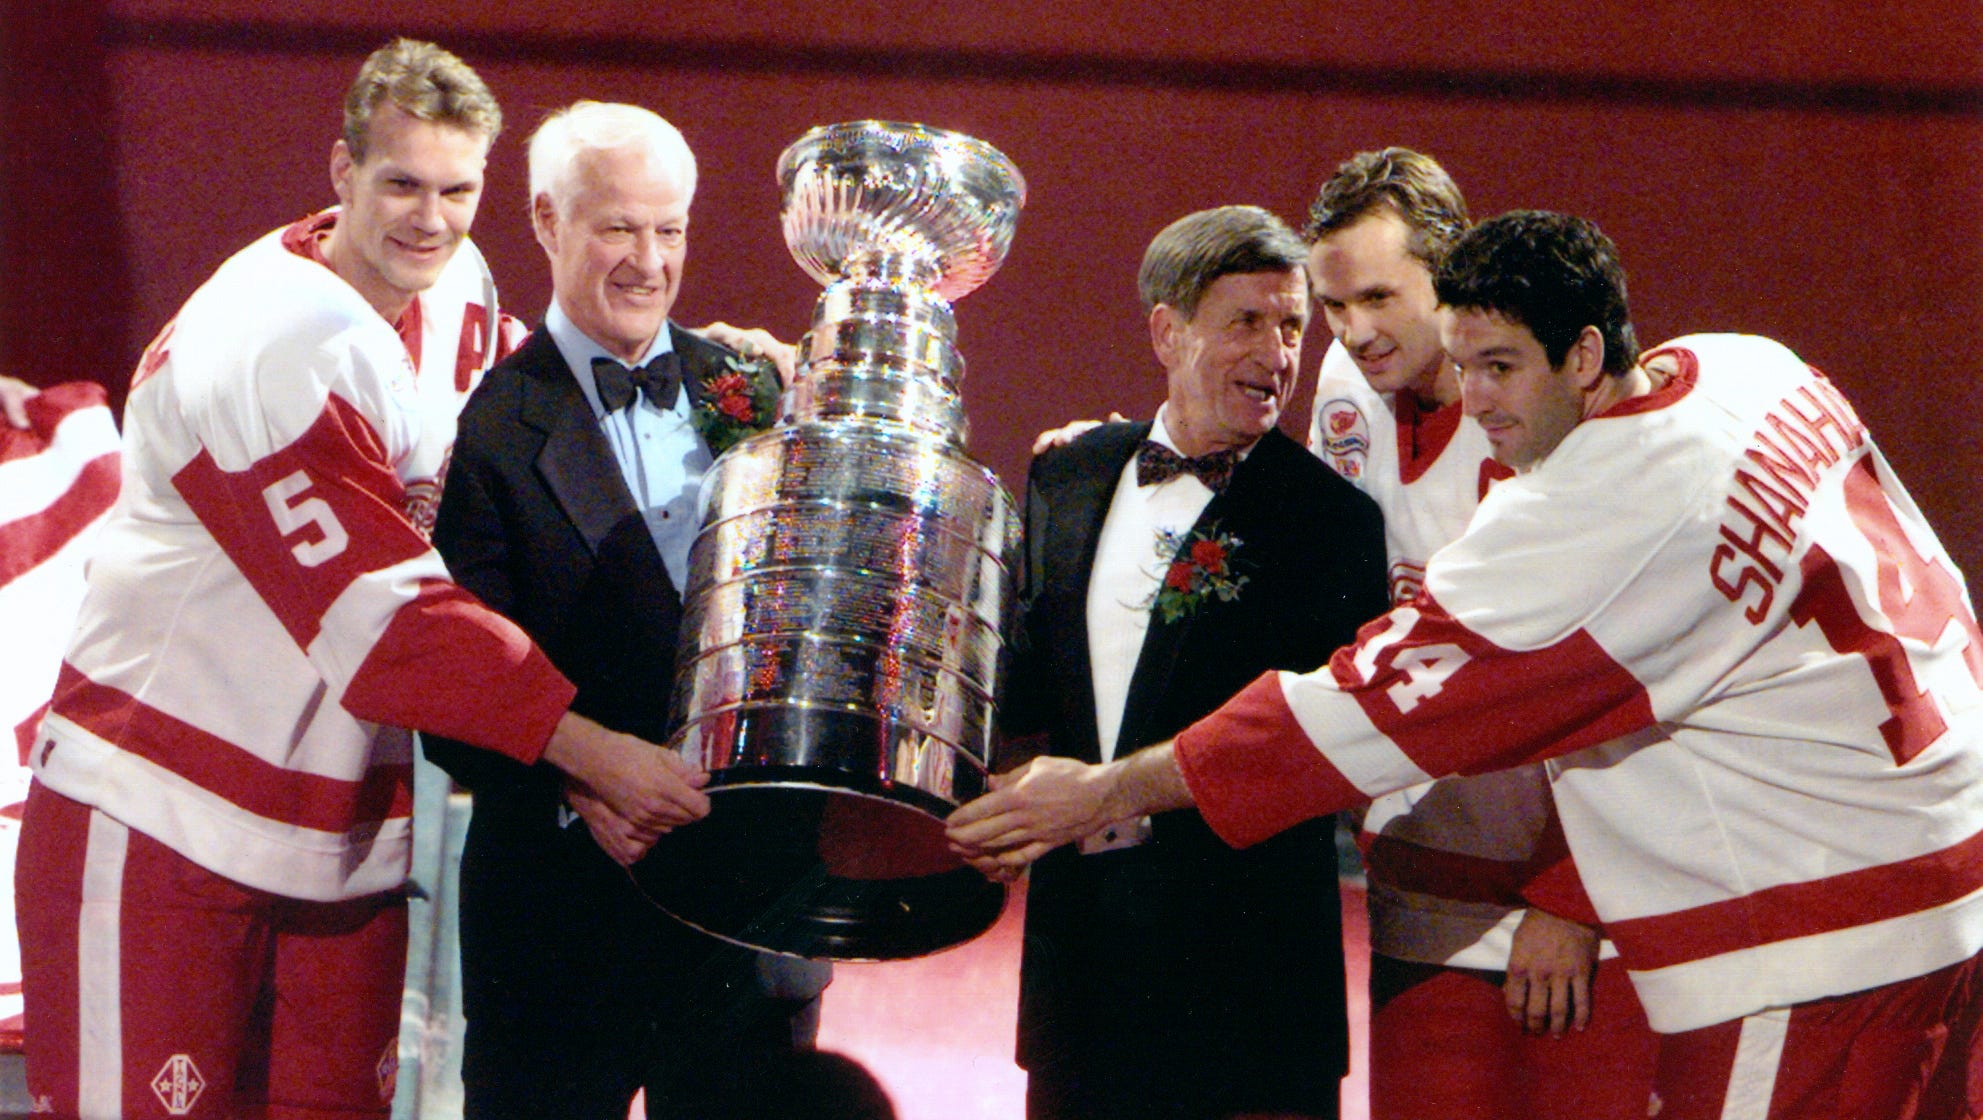 From left, Nicklas Lidstrom, Gordie Howe, Ted Lindsay, Steve Yzerman and Brendan Shanahan pose with the Stanley Cup, which they won the previous season, during Stanley Cup banner night at the Red Wings home opener in 1997.